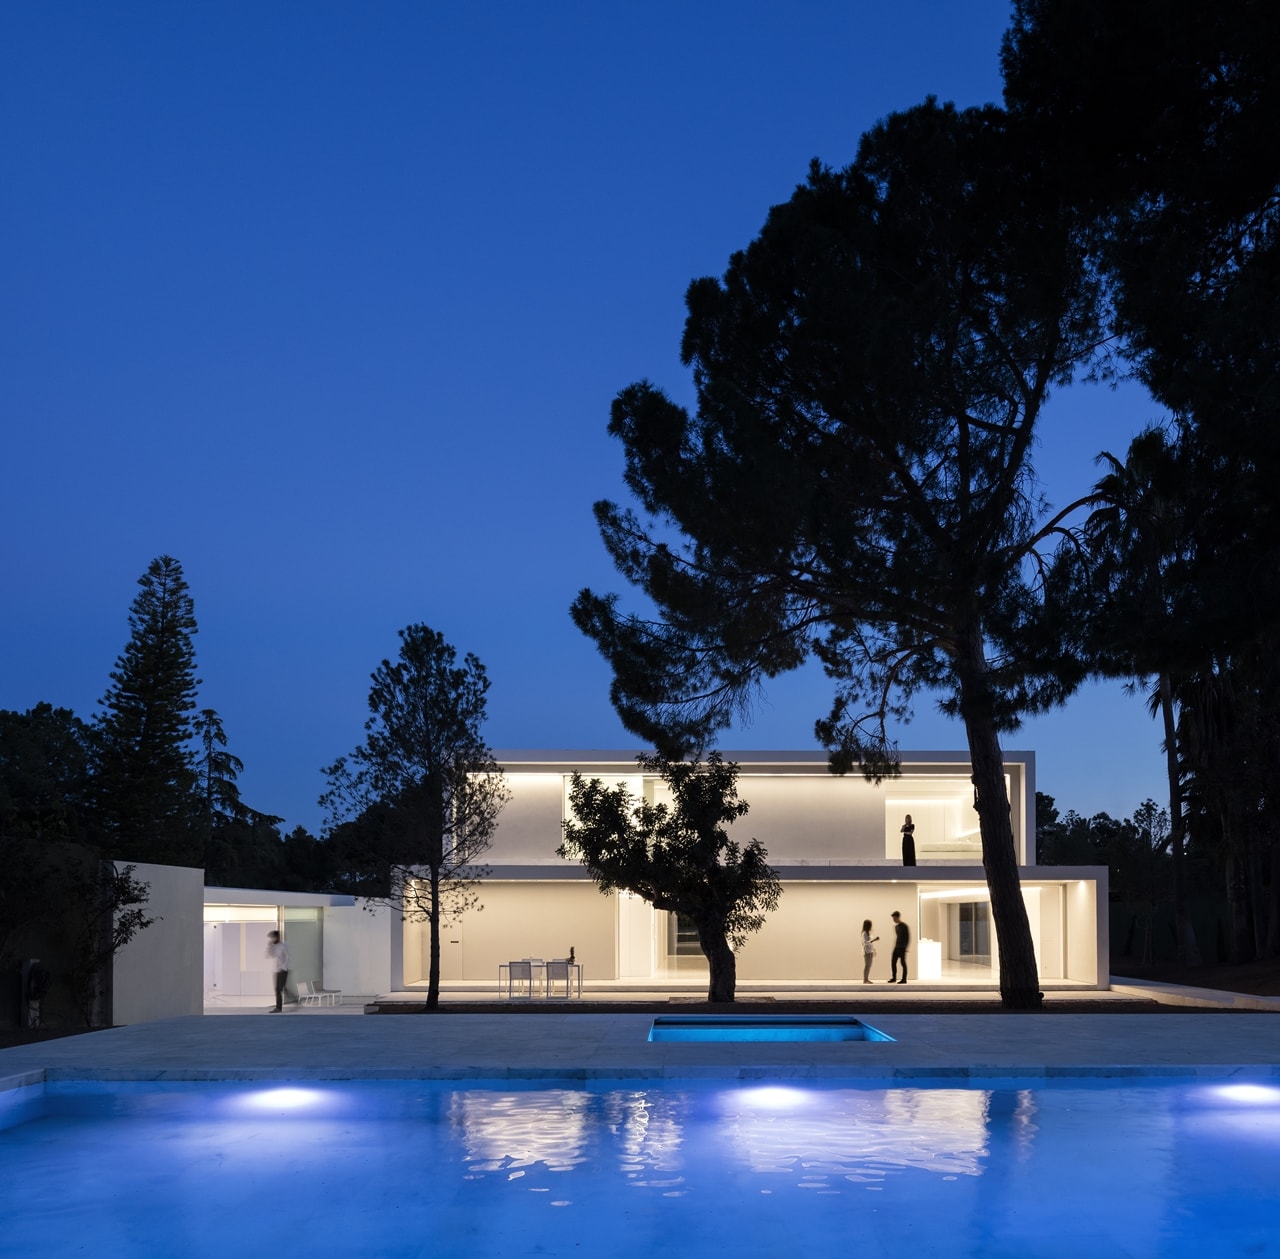 Swimming pool of minimalist house designed by Fran Silvestre Architects at night